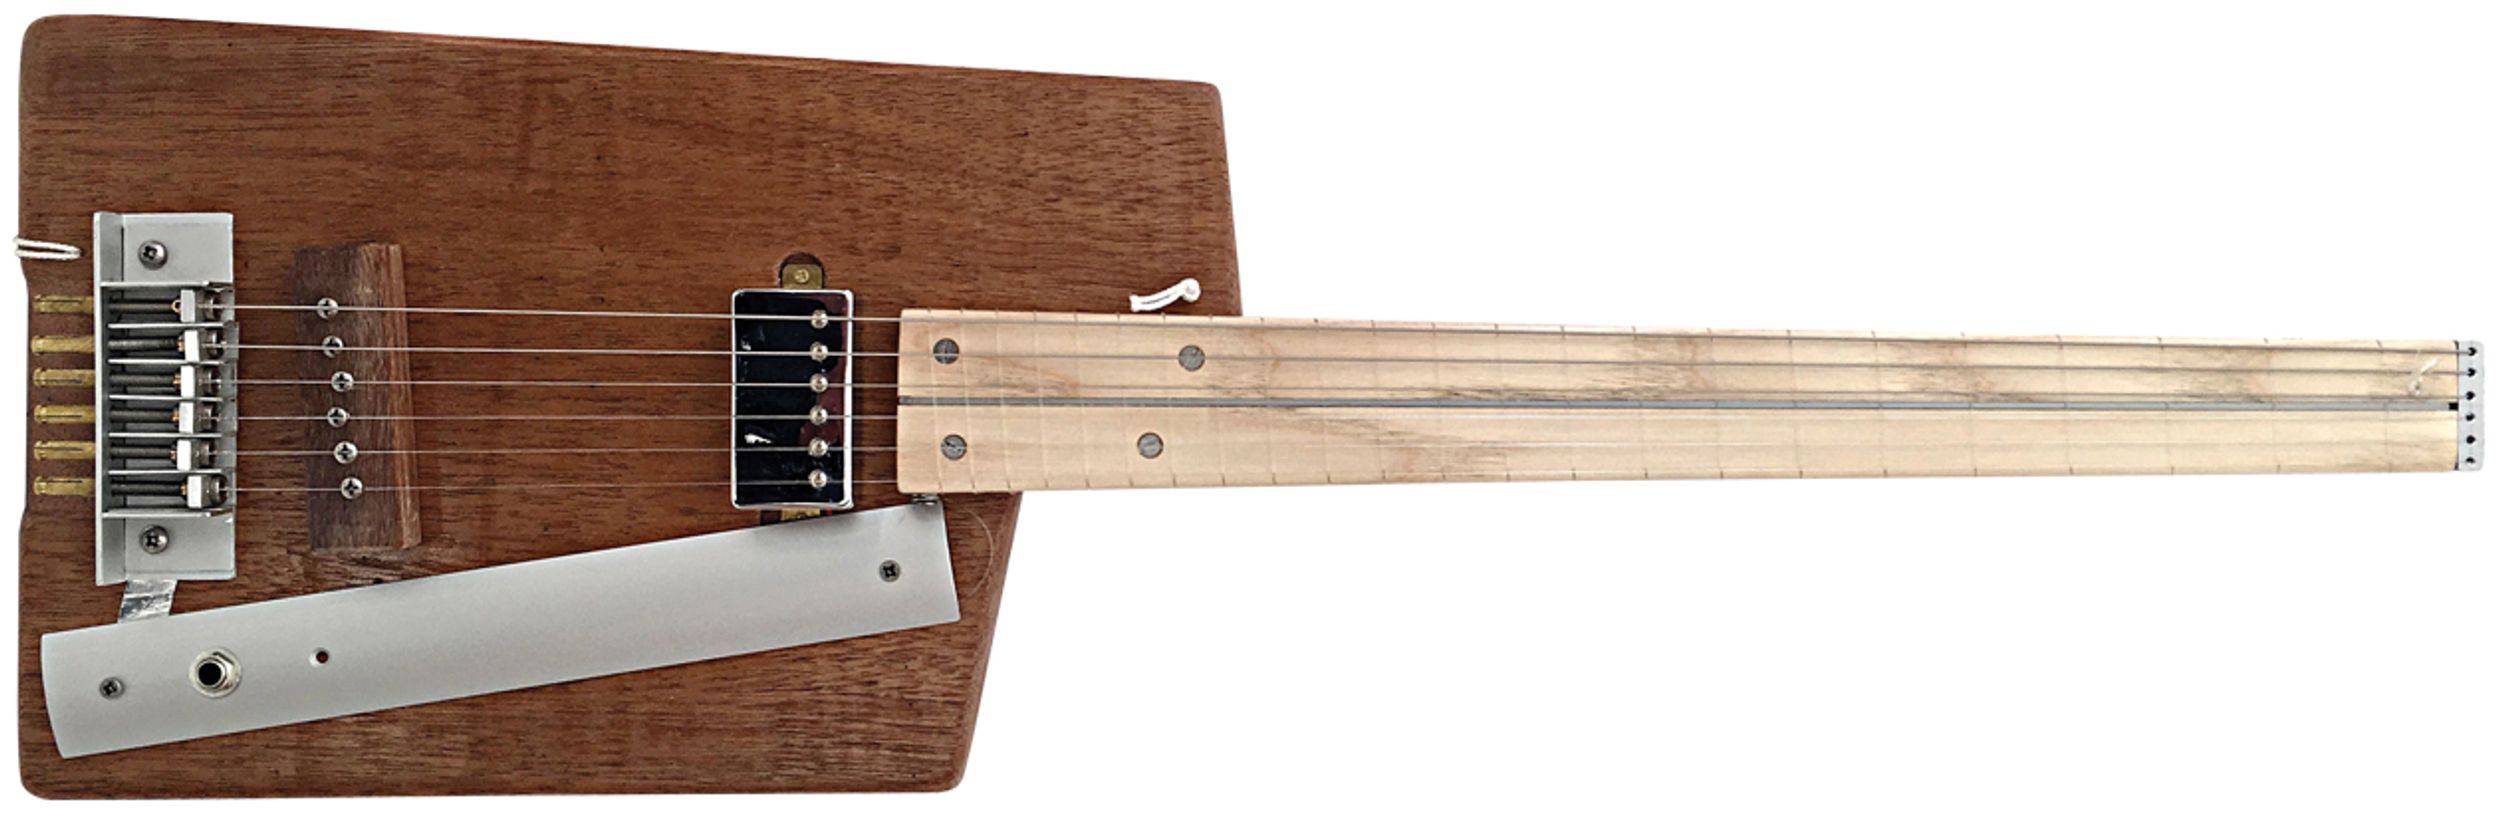 Reader Guitar of the Month: The Headless Minimalist